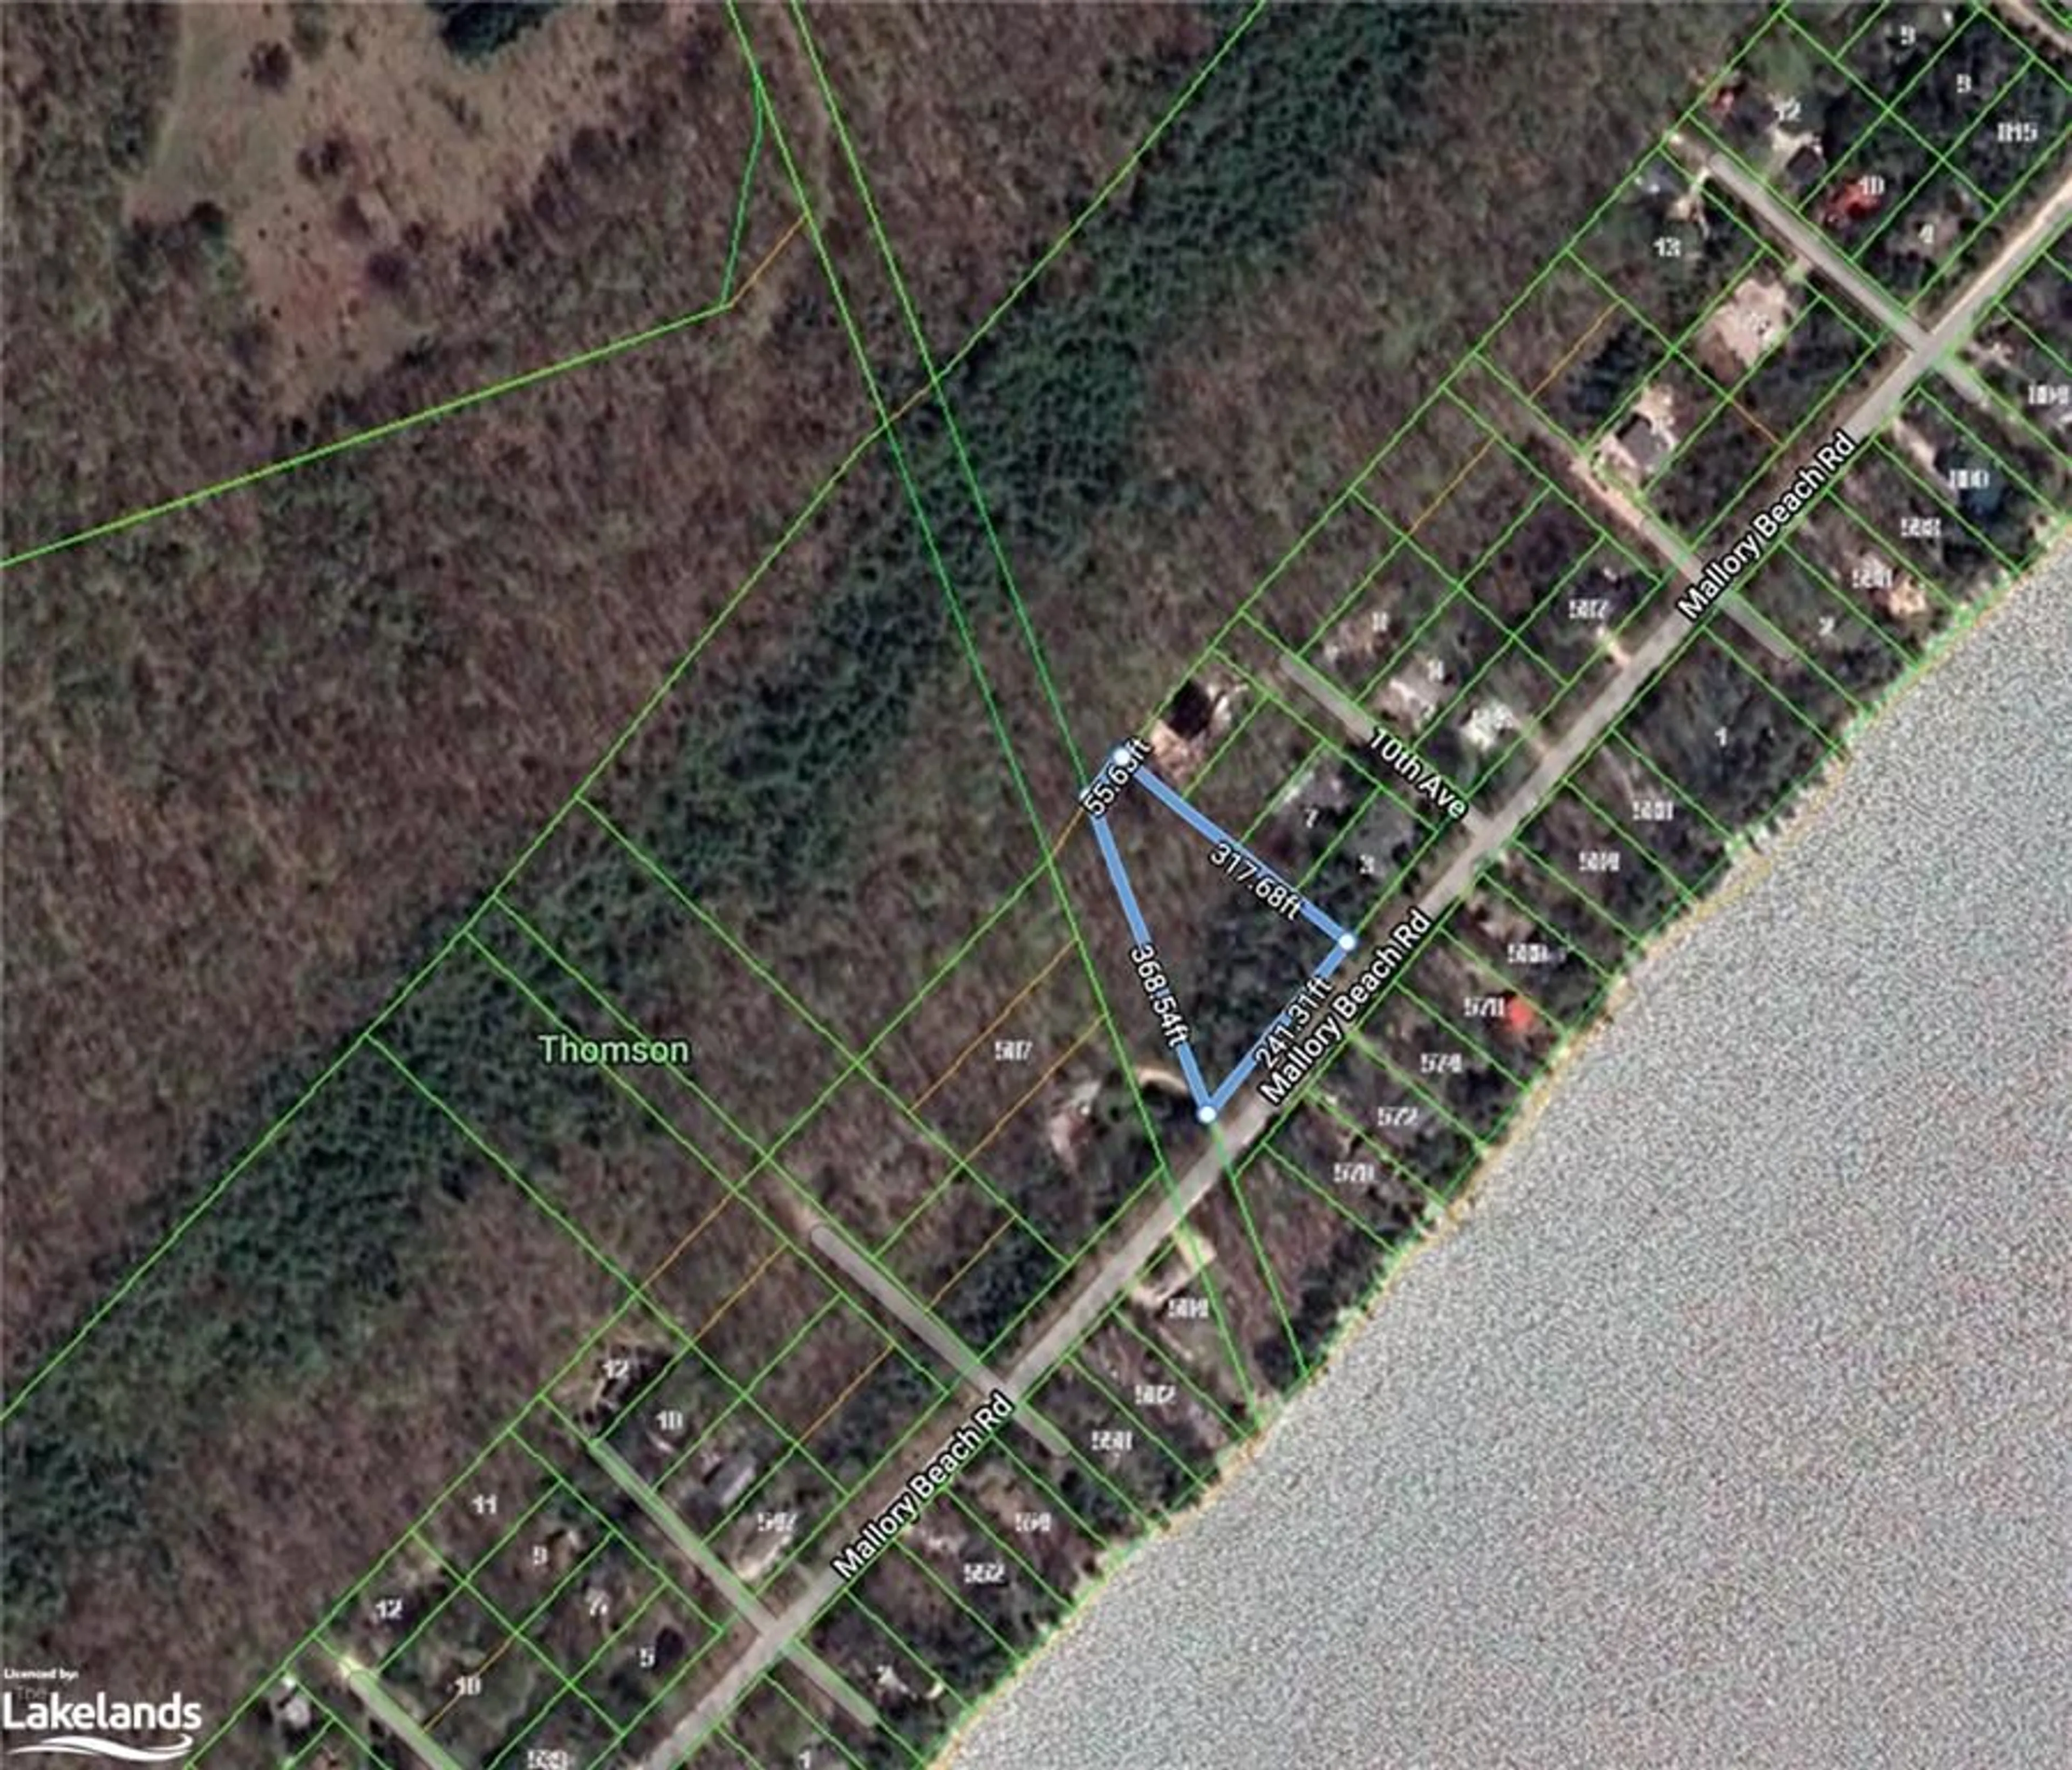 Street view for LOT 191-193 Mallory Beach Rd, South Bruce Peninsula Ontario N0H 2T0